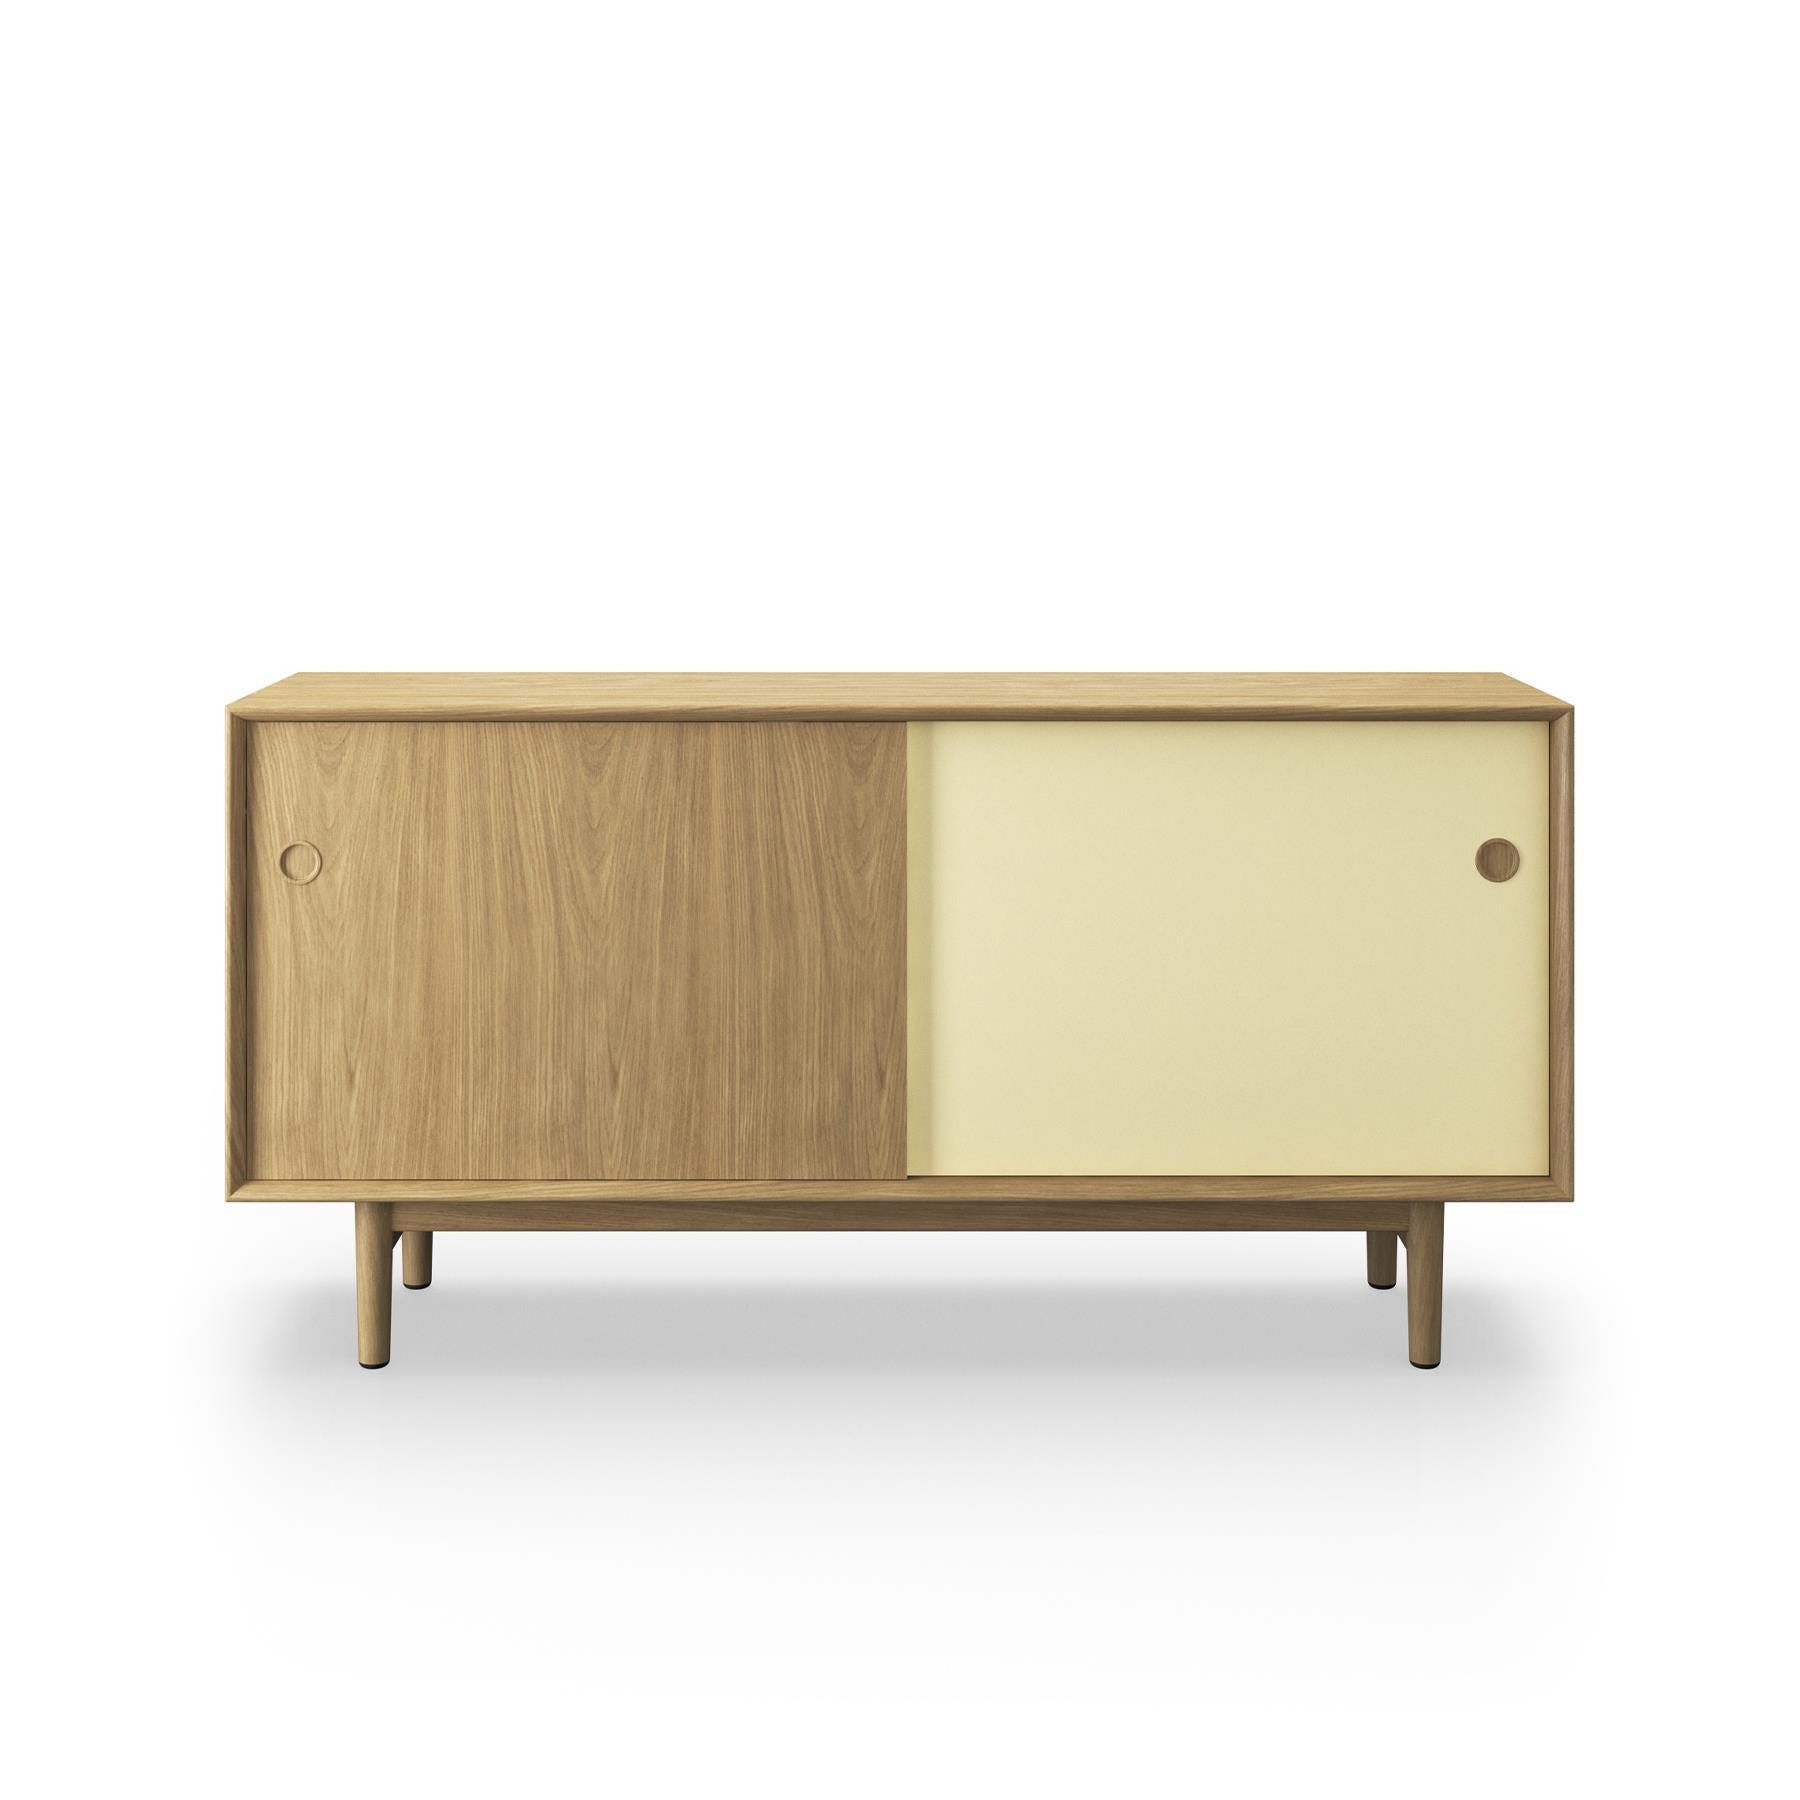 Sibast No 11 Sideboard White Oiled Oak Yellow And Natural Front Wooden Legs Light Wood Designer Furniture From Holloways Of Ludlow